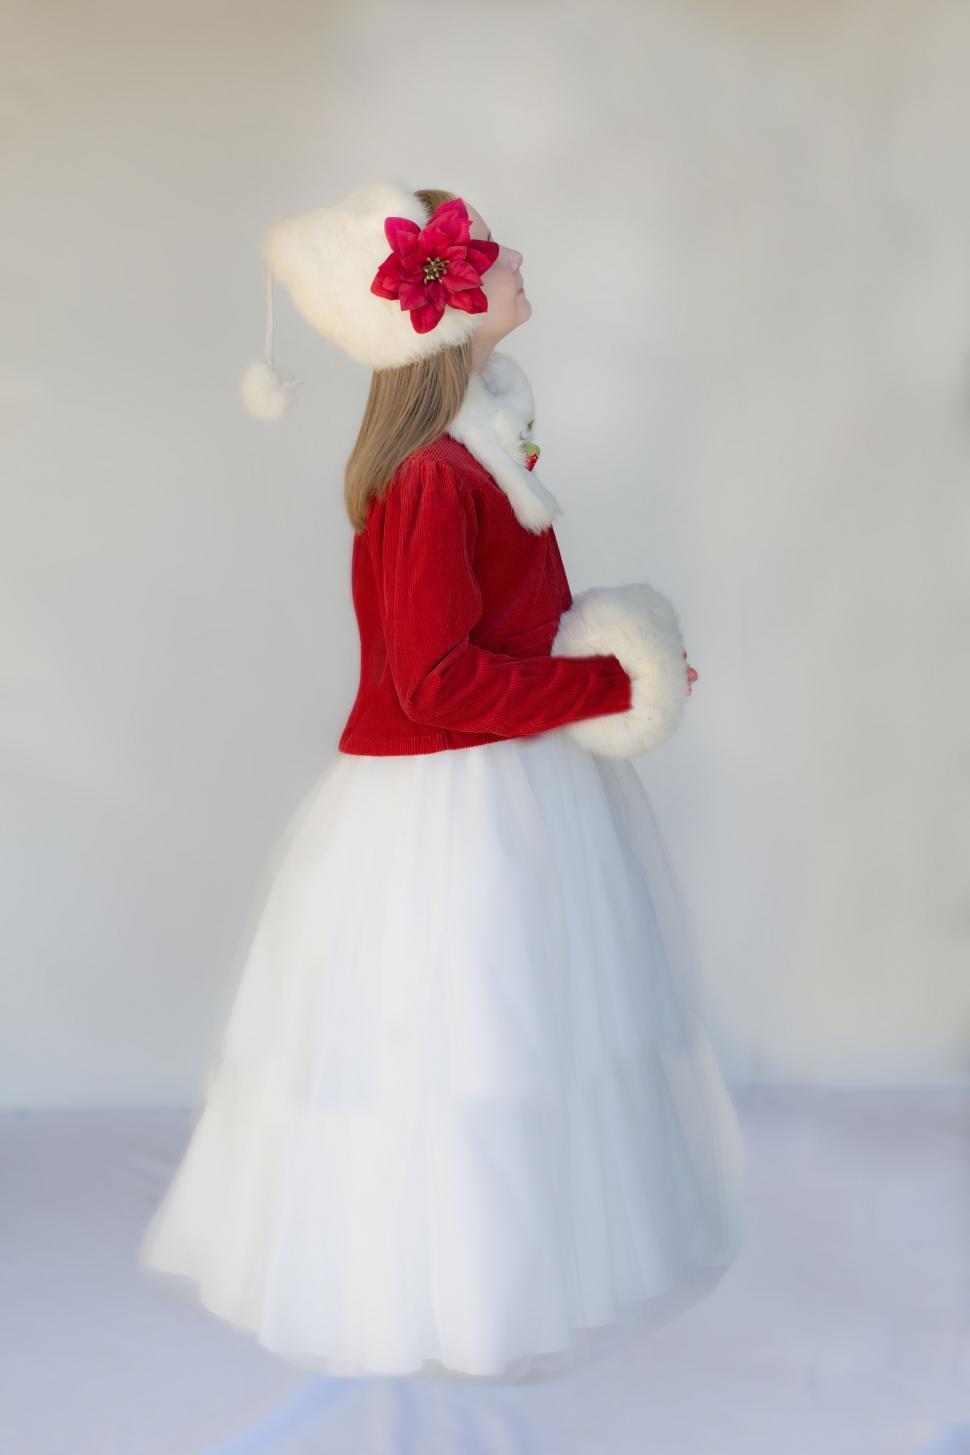 Free Image of Girl in red and white Christmas Dress 